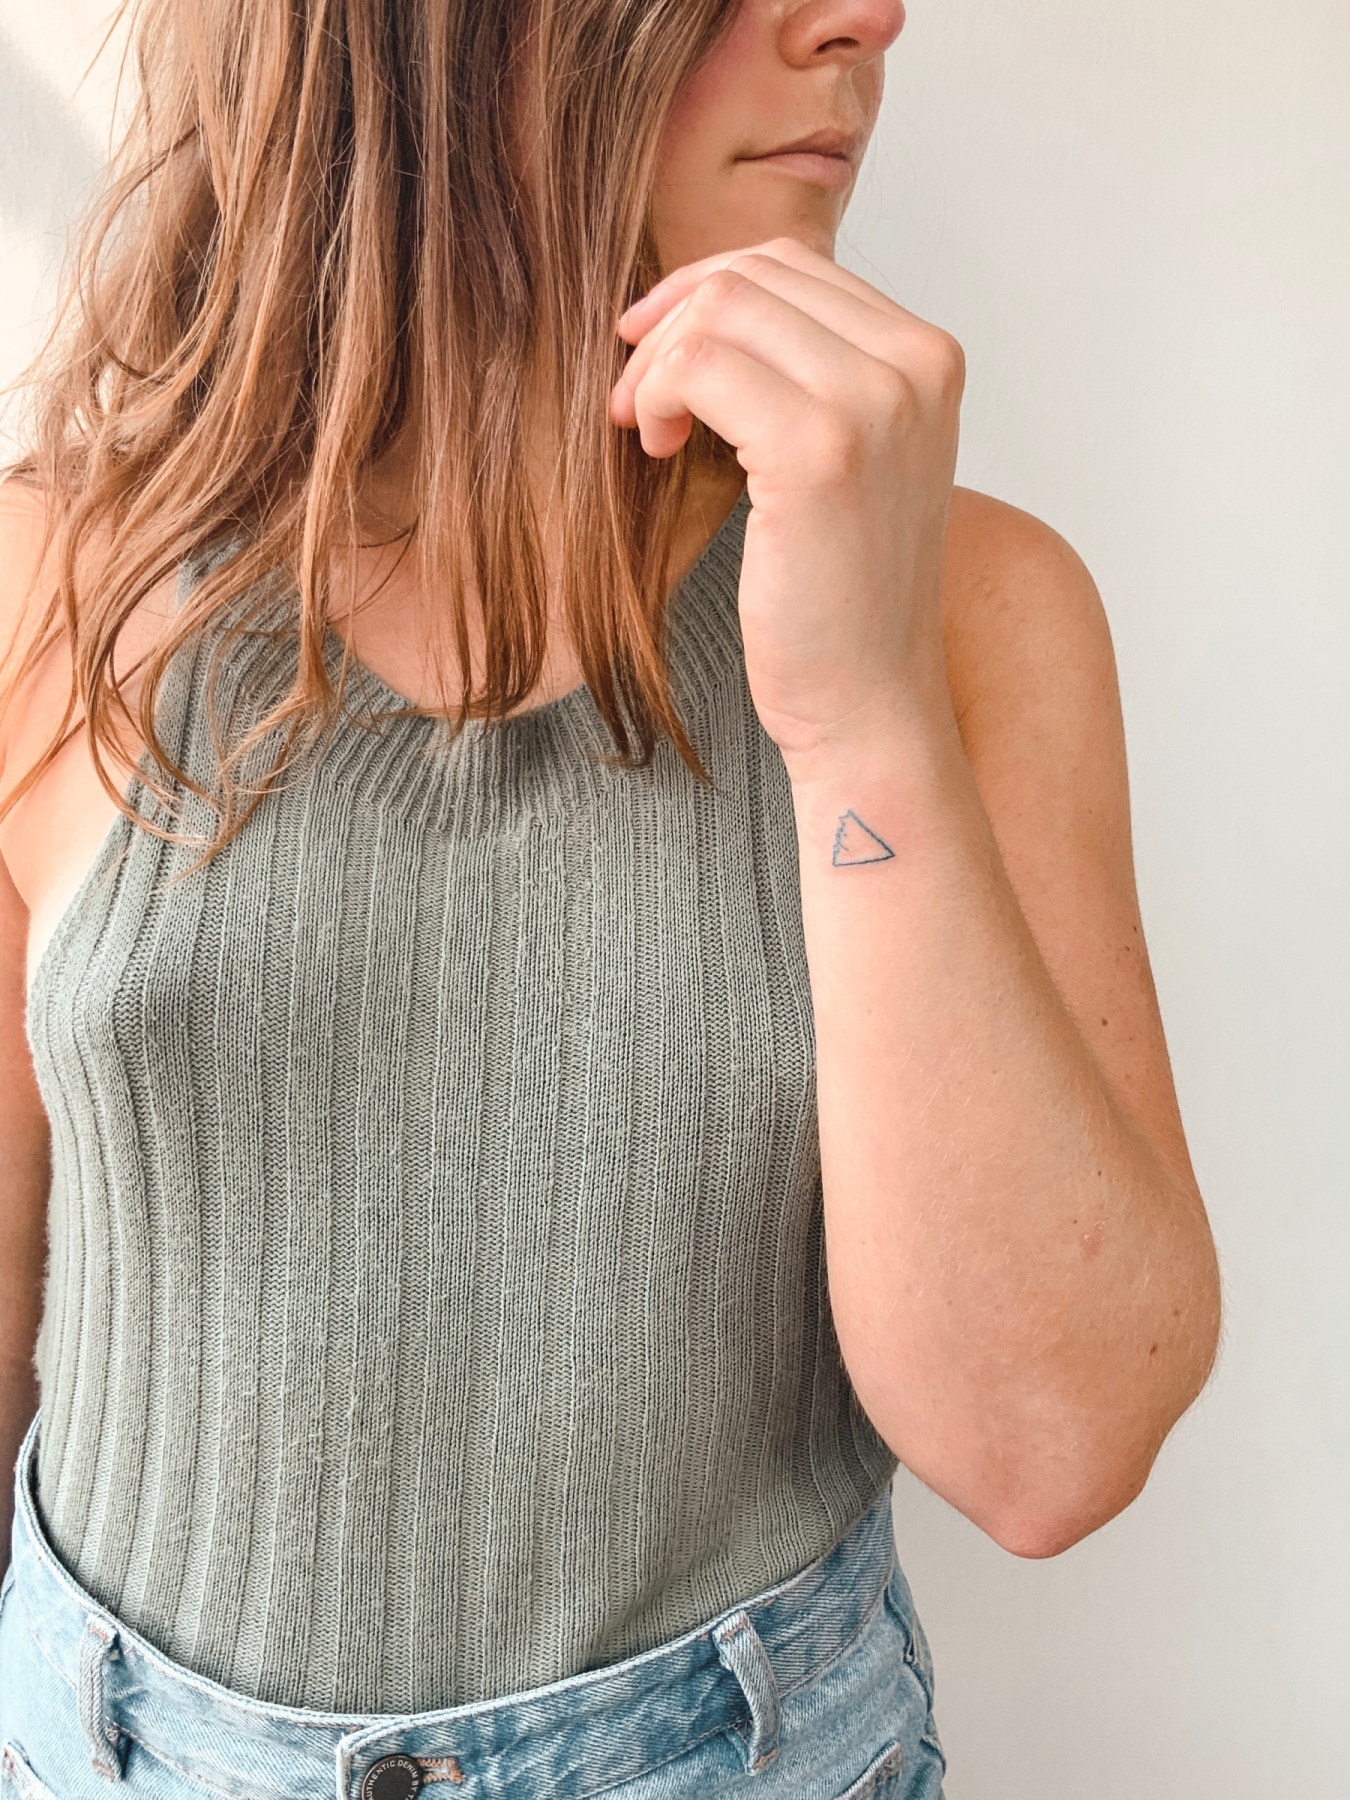 The Best Place For Women To Get A Tattoo In Lima | lifestyletraveler.co | IG: @lifestyletraveler.co